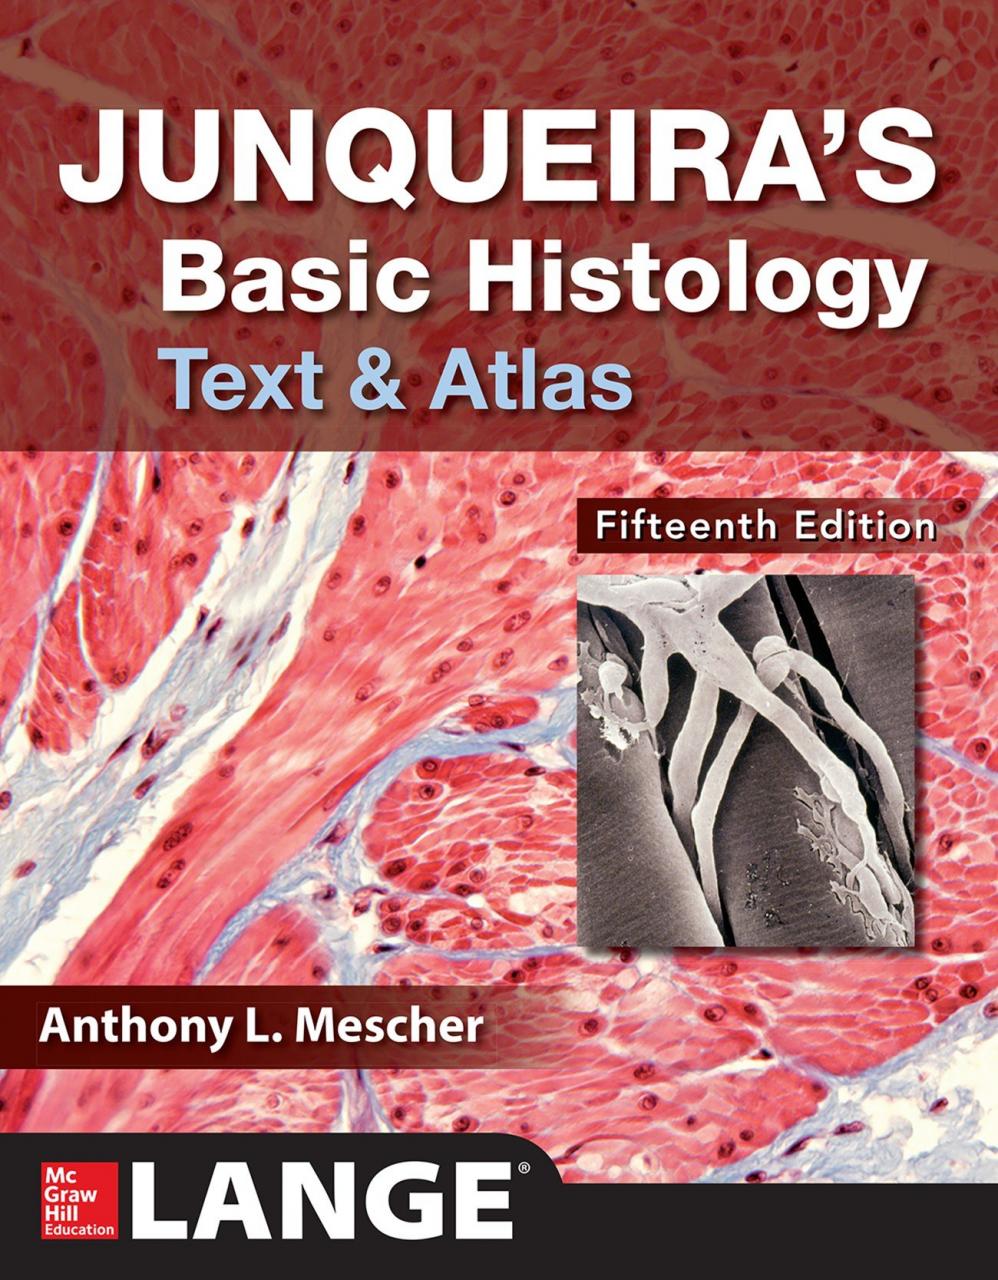 Junqueira's basic histology: text and atlas / Anthony L. Mescher, PhD (Professor of Anatomy and Cell Biology, Indiana University School of Medicine, Bloomington, Indiana), [2018]; Fifteenth edition